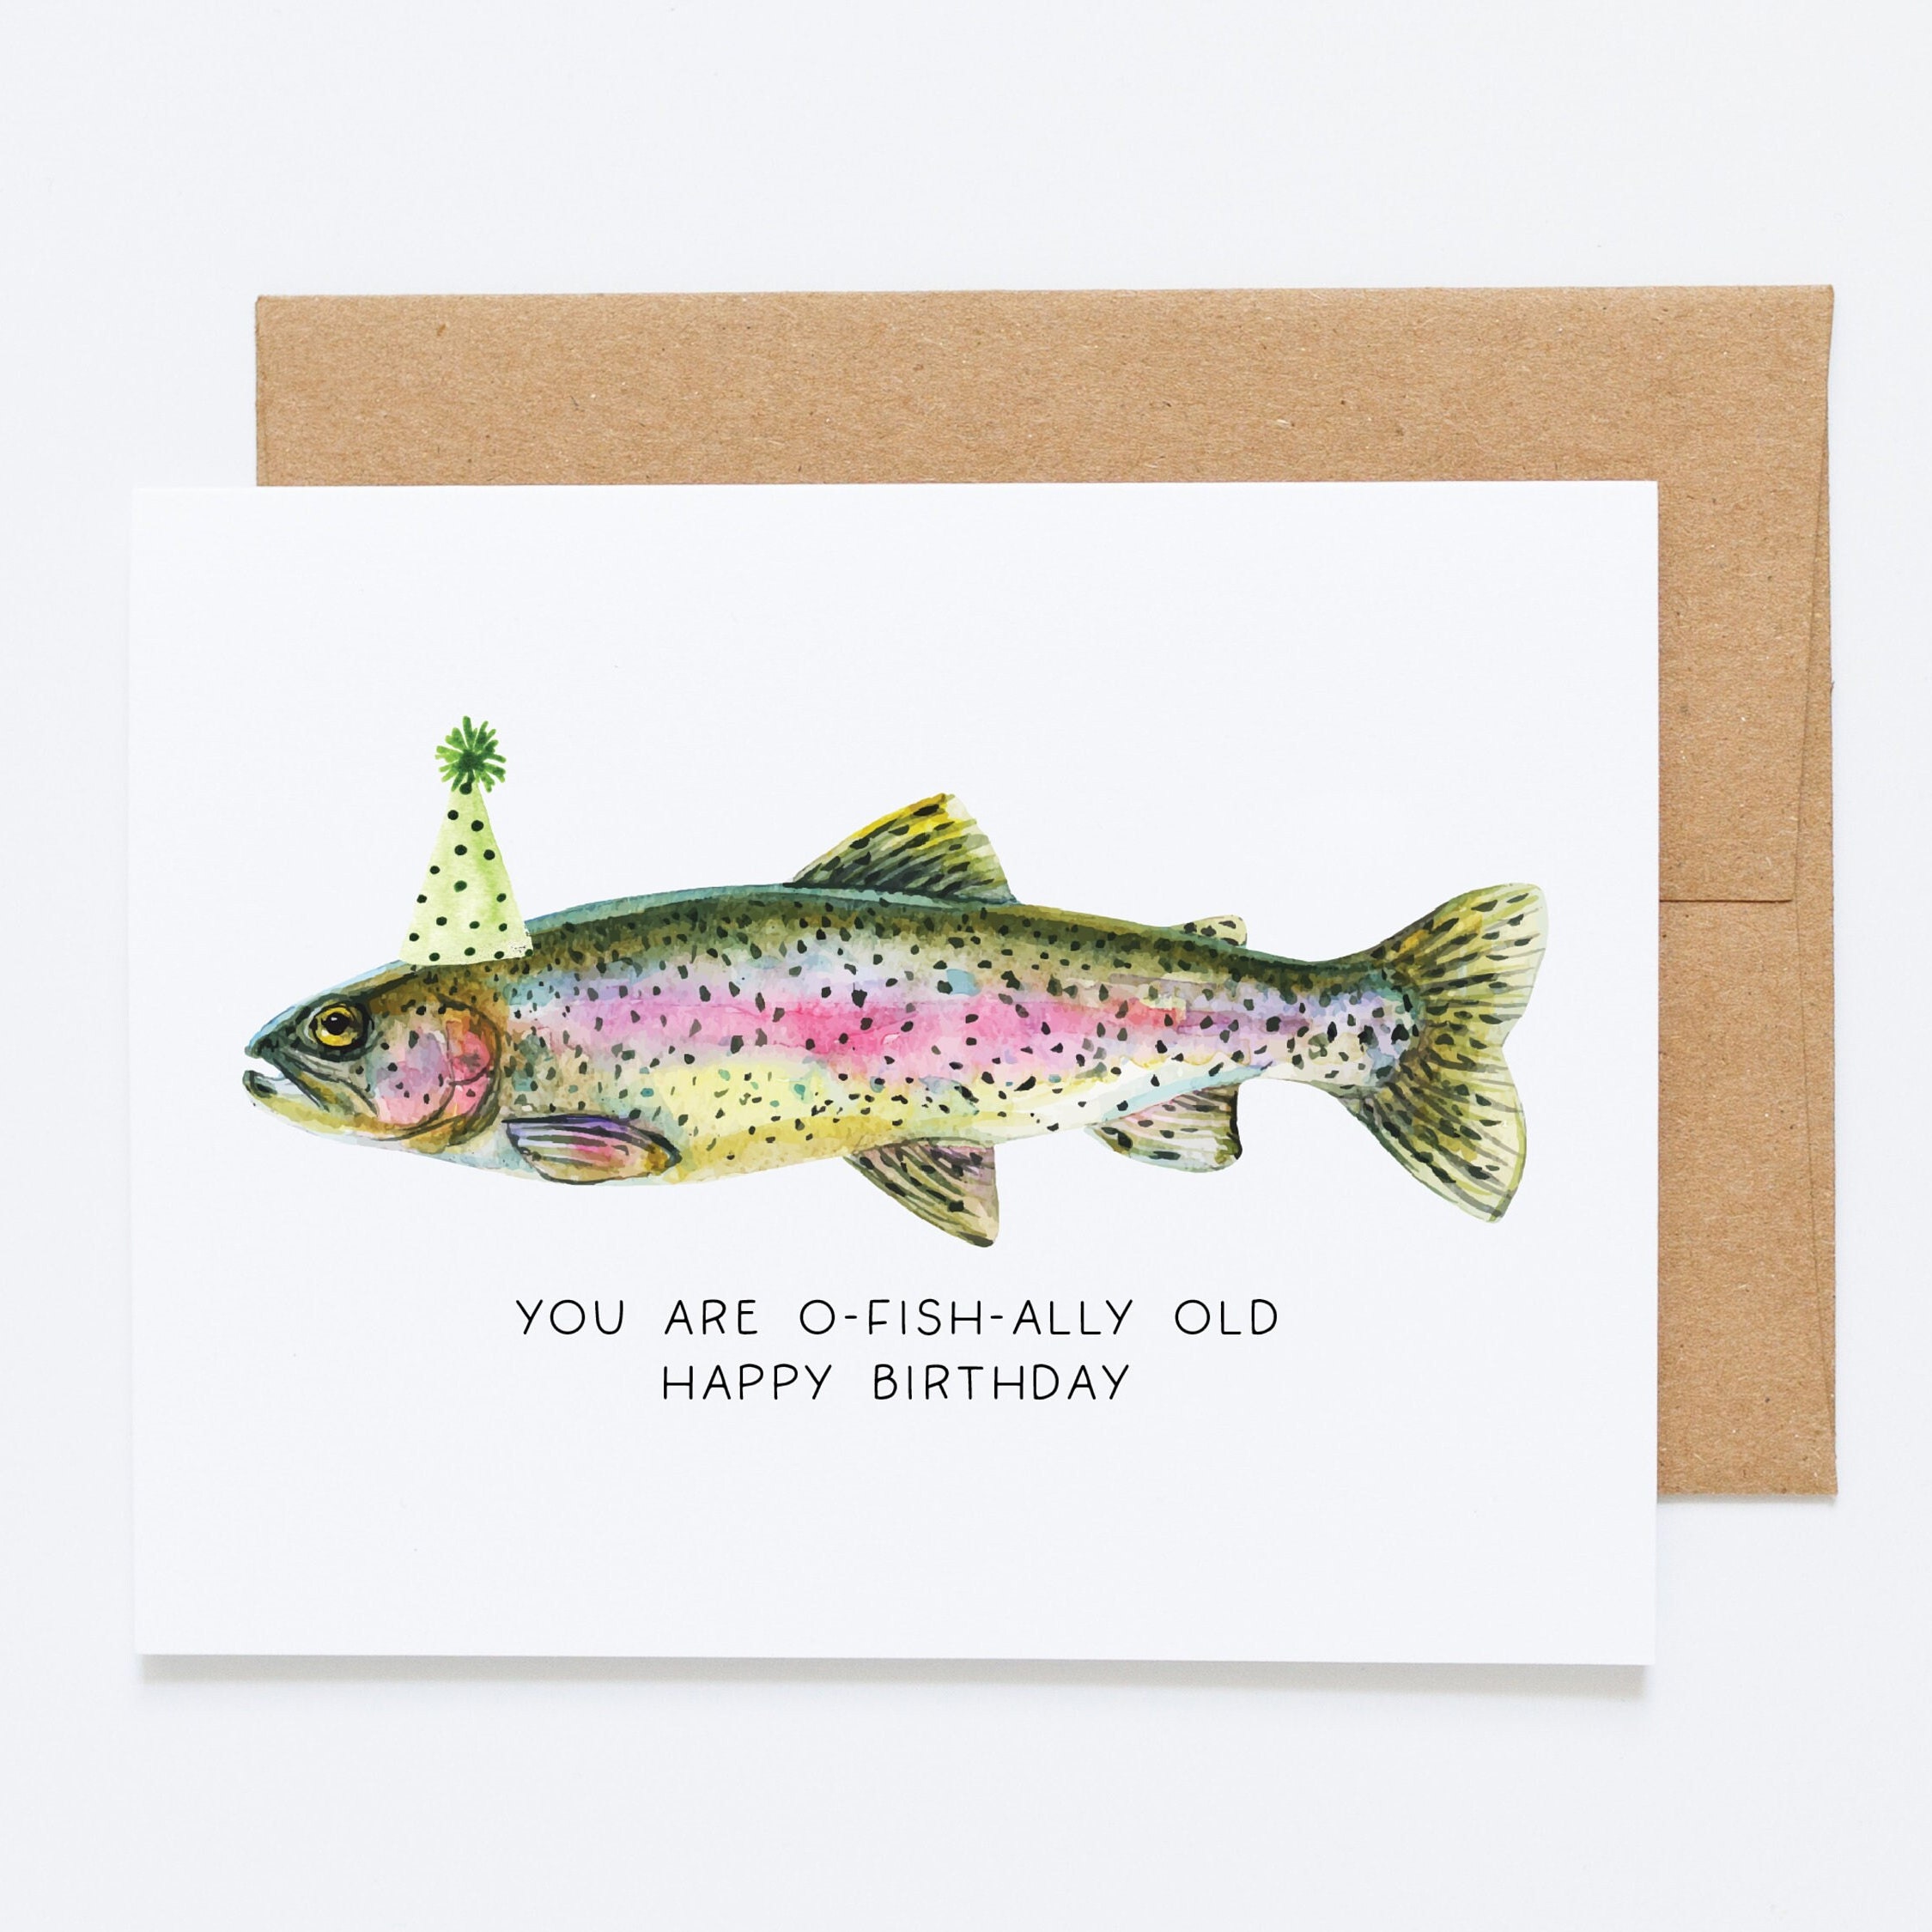 Funny Fishing Pun Birthday Card You Are O-fish-ally Old Perfect